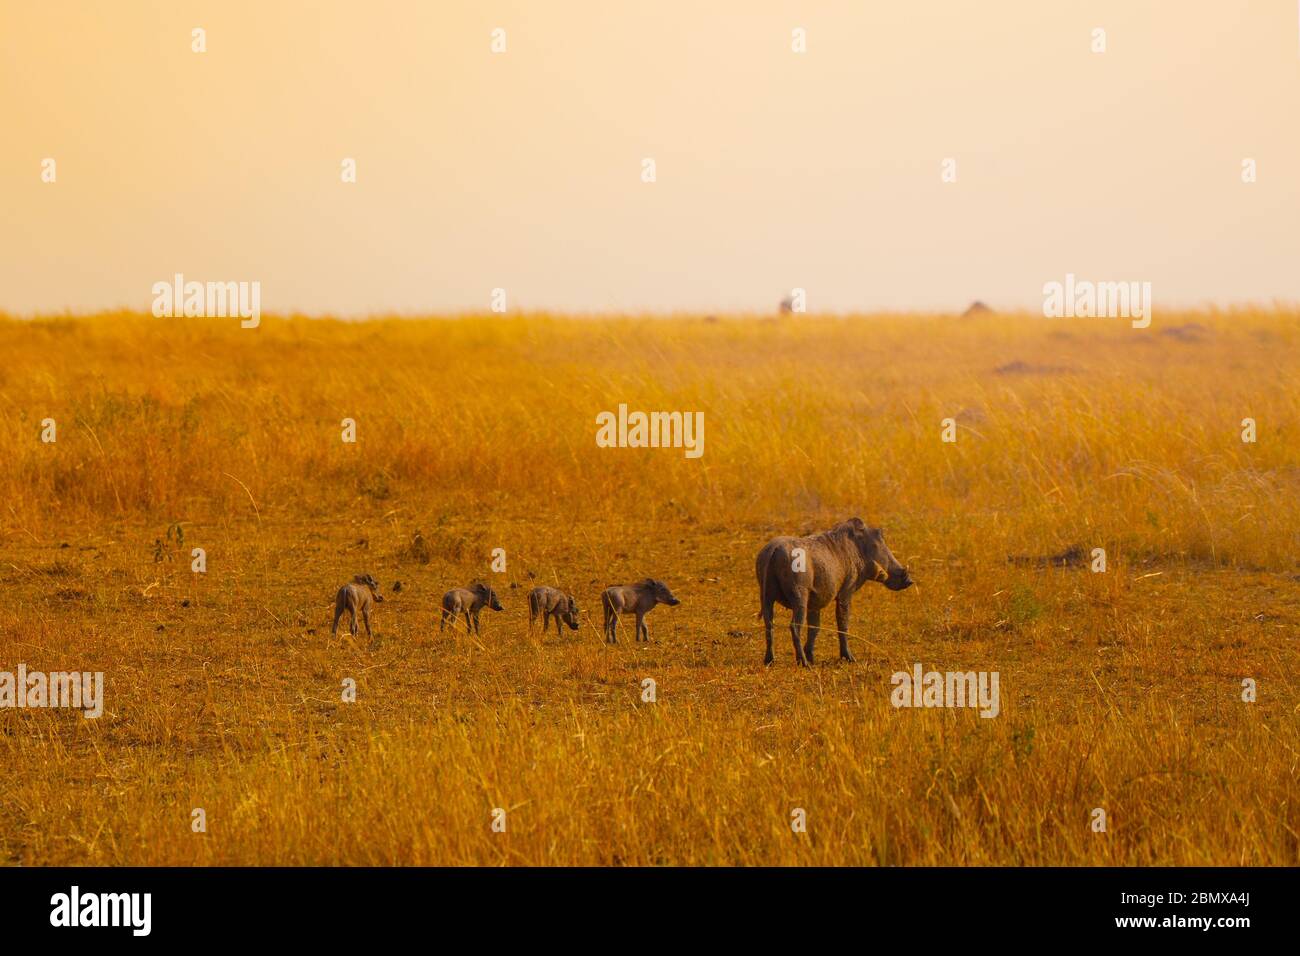 Family group of warthogs pigs standing together in Kenya savanna, Africa Stock Photo